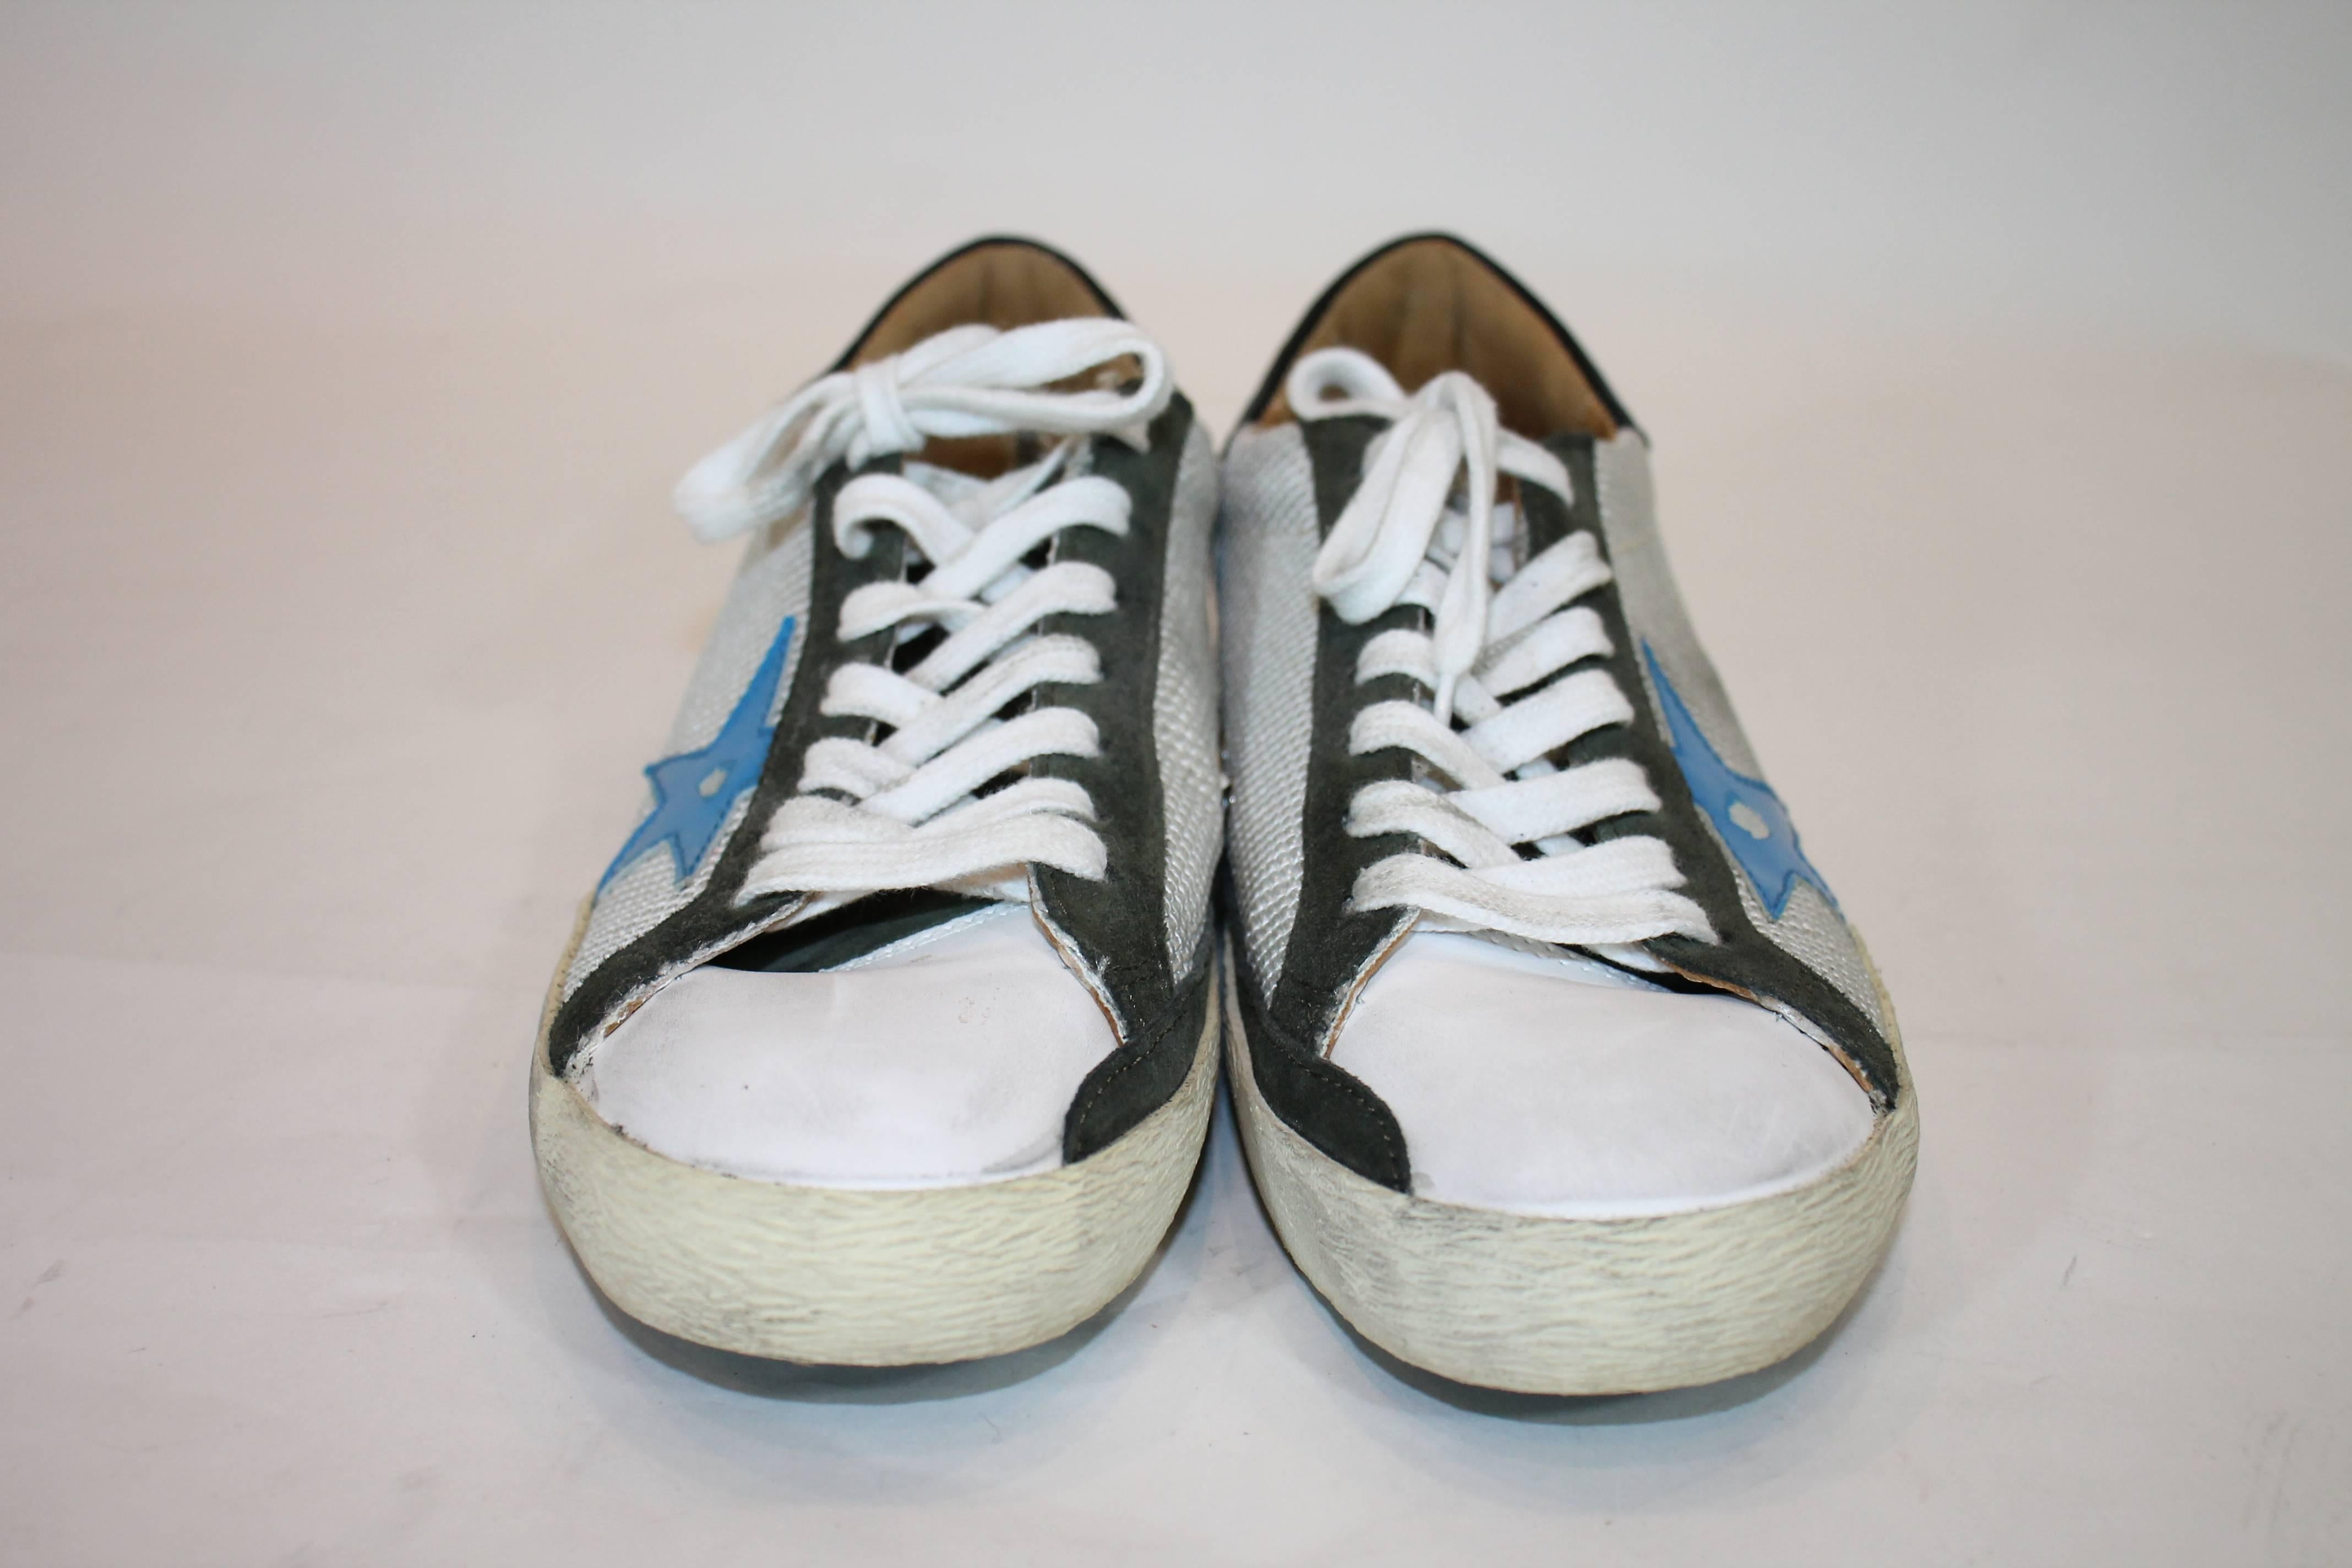 Golden Goose Deluxe Brand 'super star' sneakers in white, green and blue. Suede and canvas. Featuring a round toe, a contrasting star patch at the side, a lace-up front fastening, a brand embossed tongue and a white rubber sole. Original Price $575.